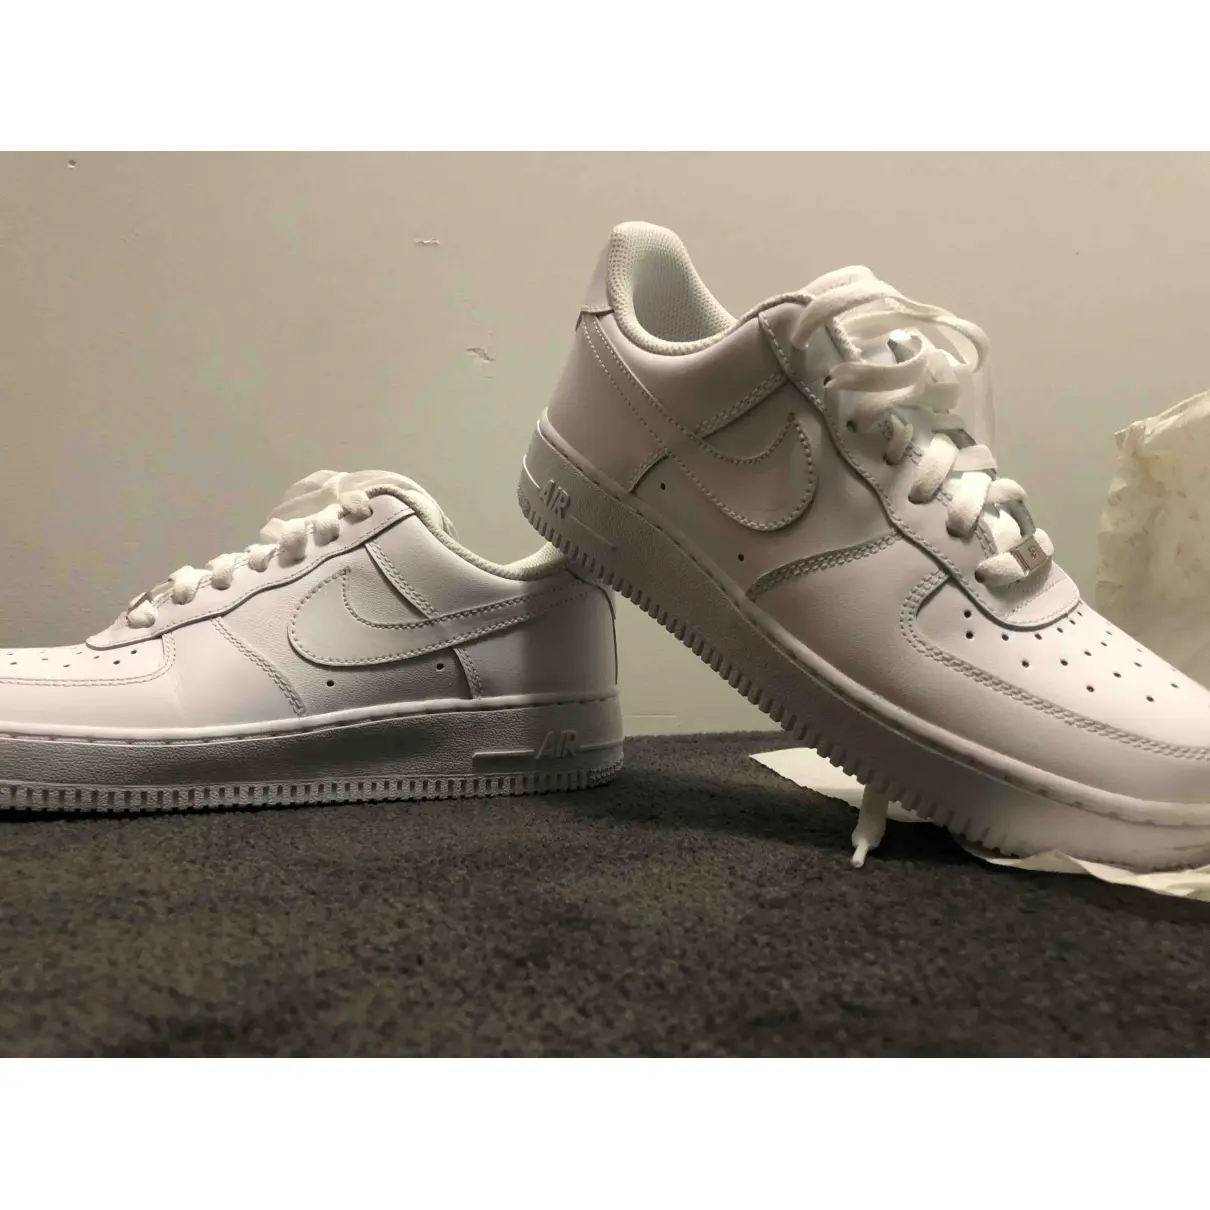 Buy Nike Air Force 1 leather low trainers online